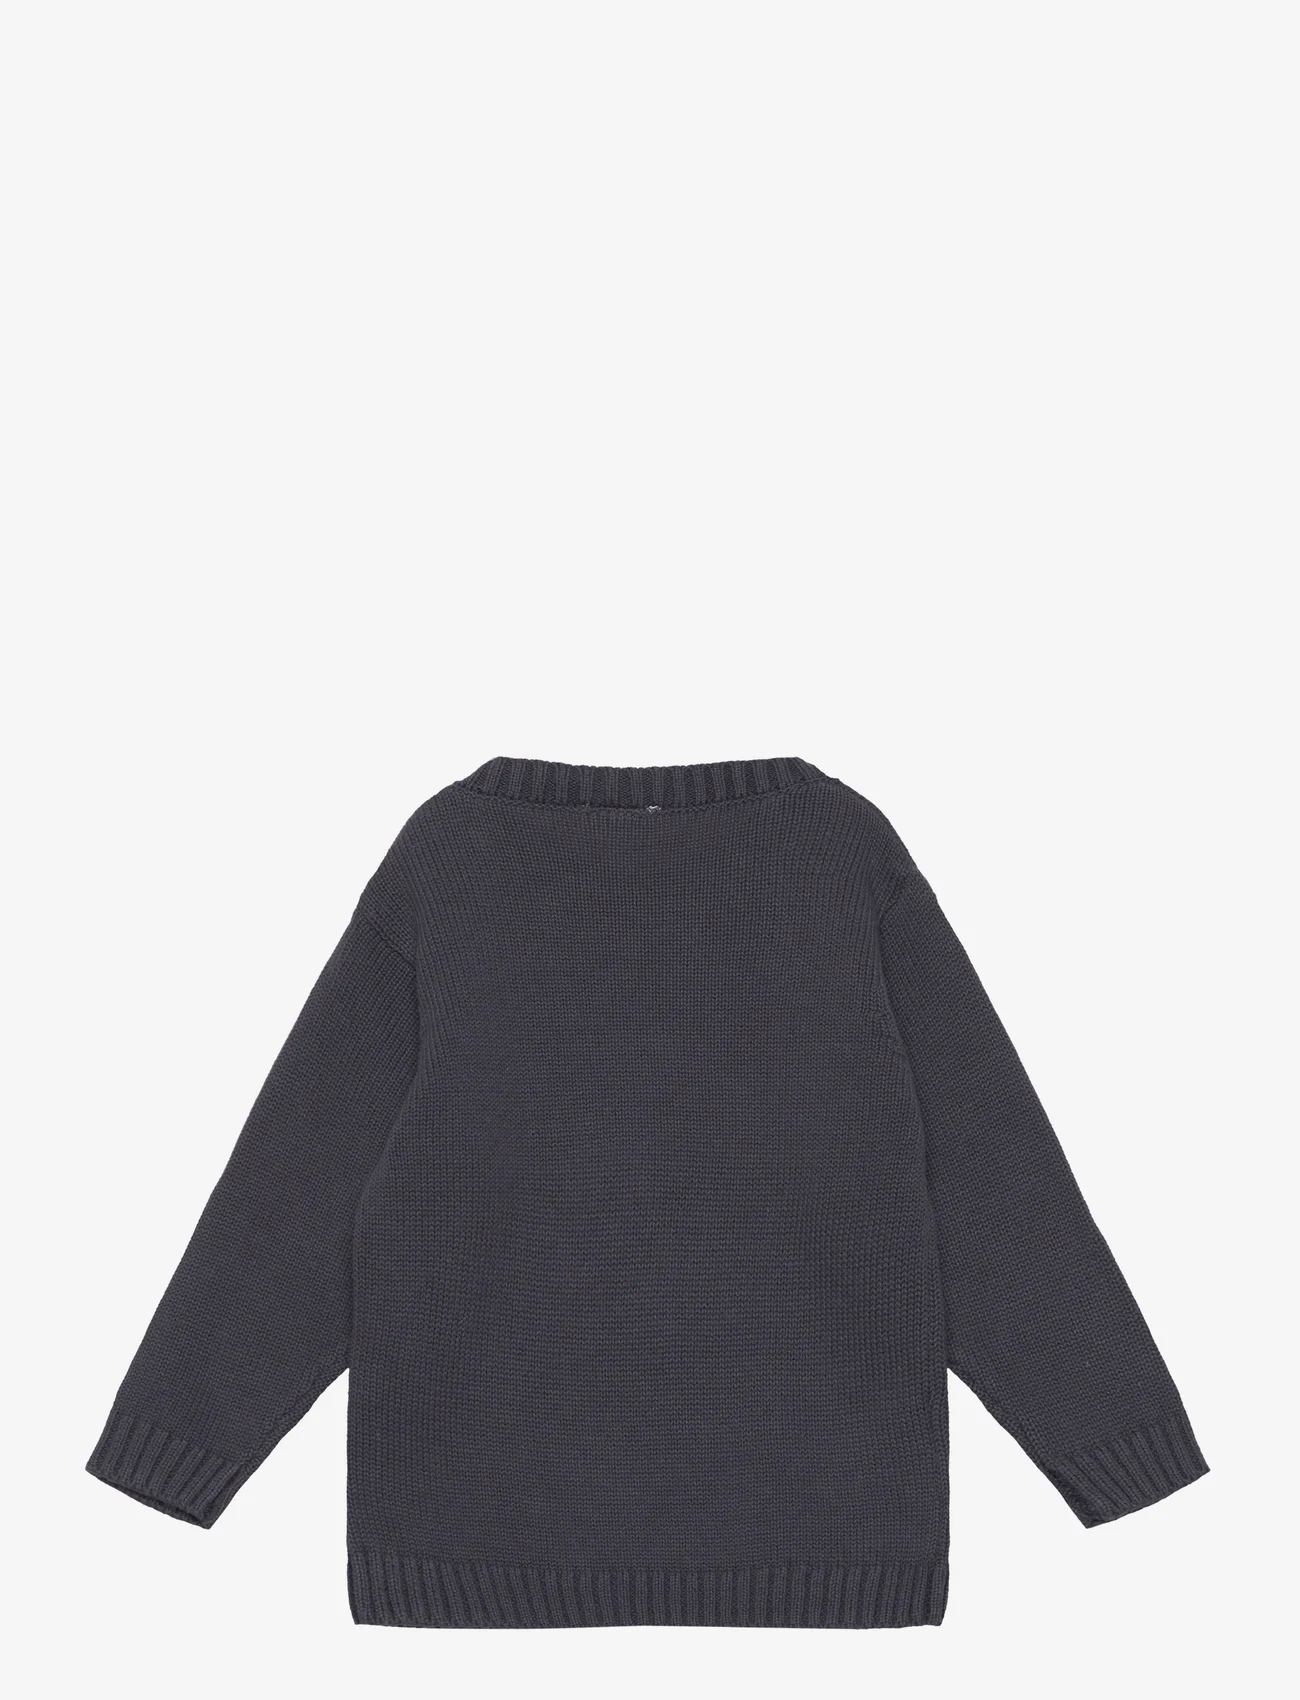 Hust & Claire - Pilou - Pullover - swetry - blue night - 1